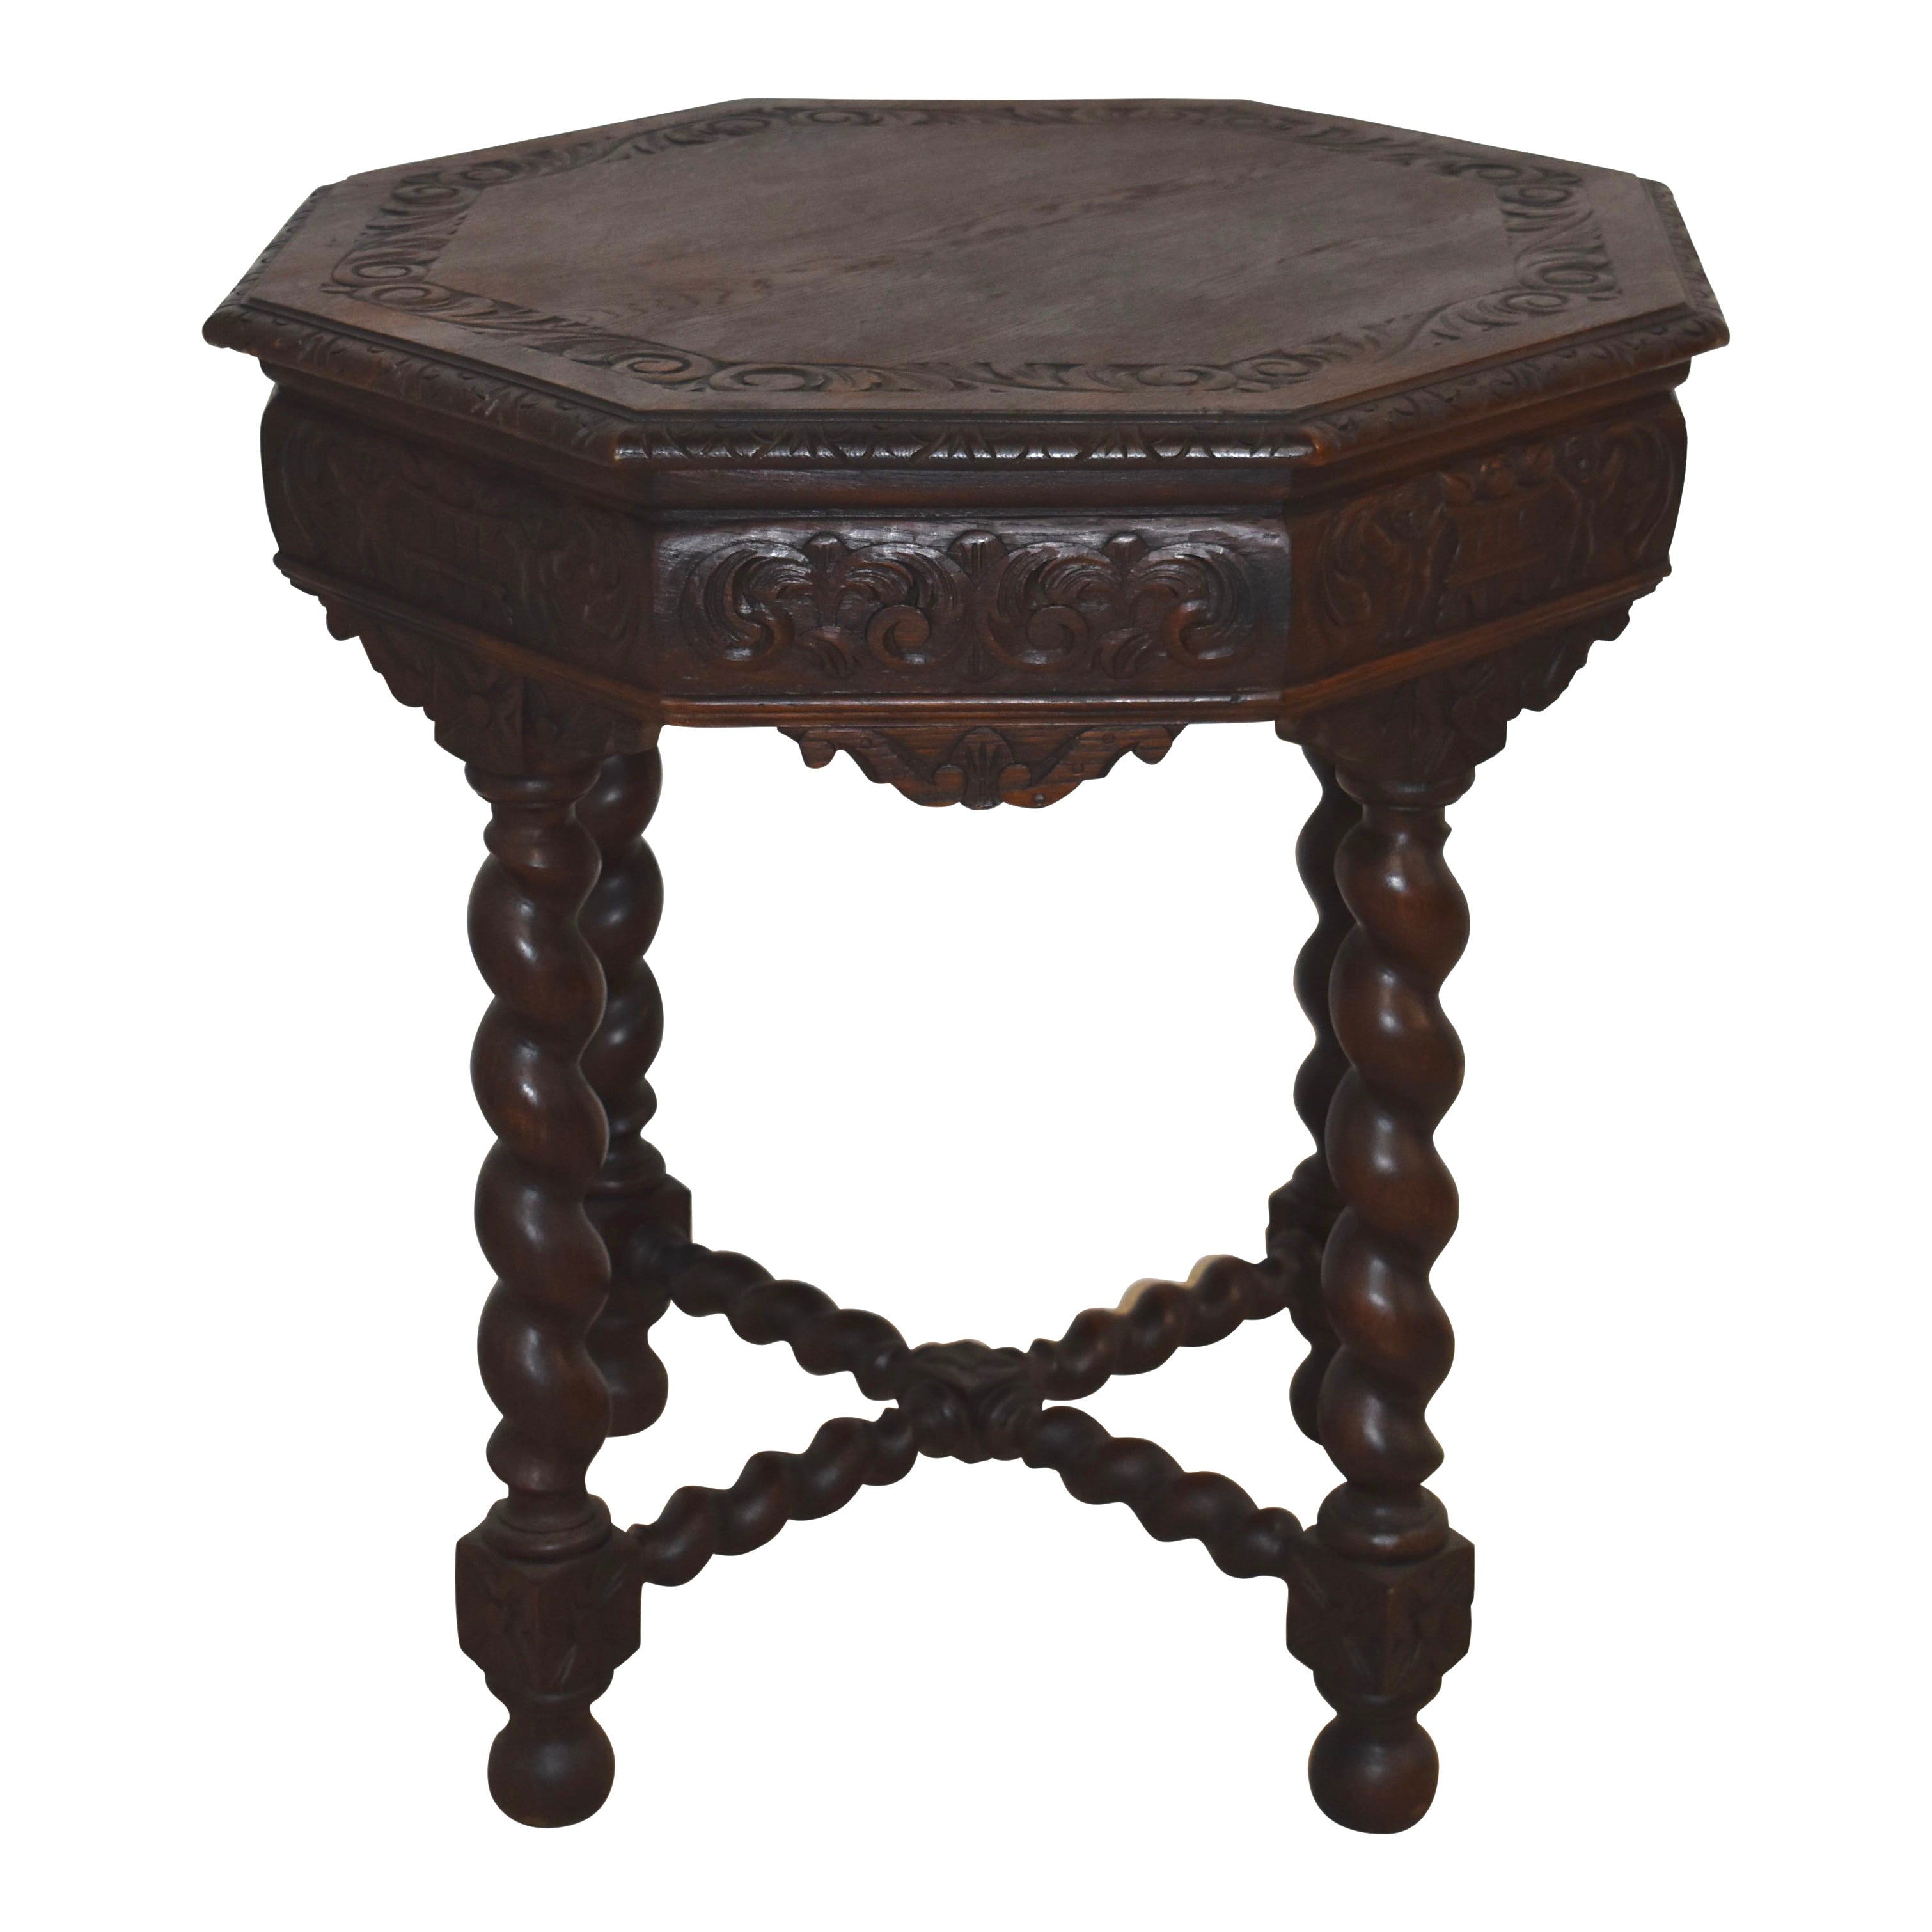 Carved Oak Octagon Table with Barley Twist Legs